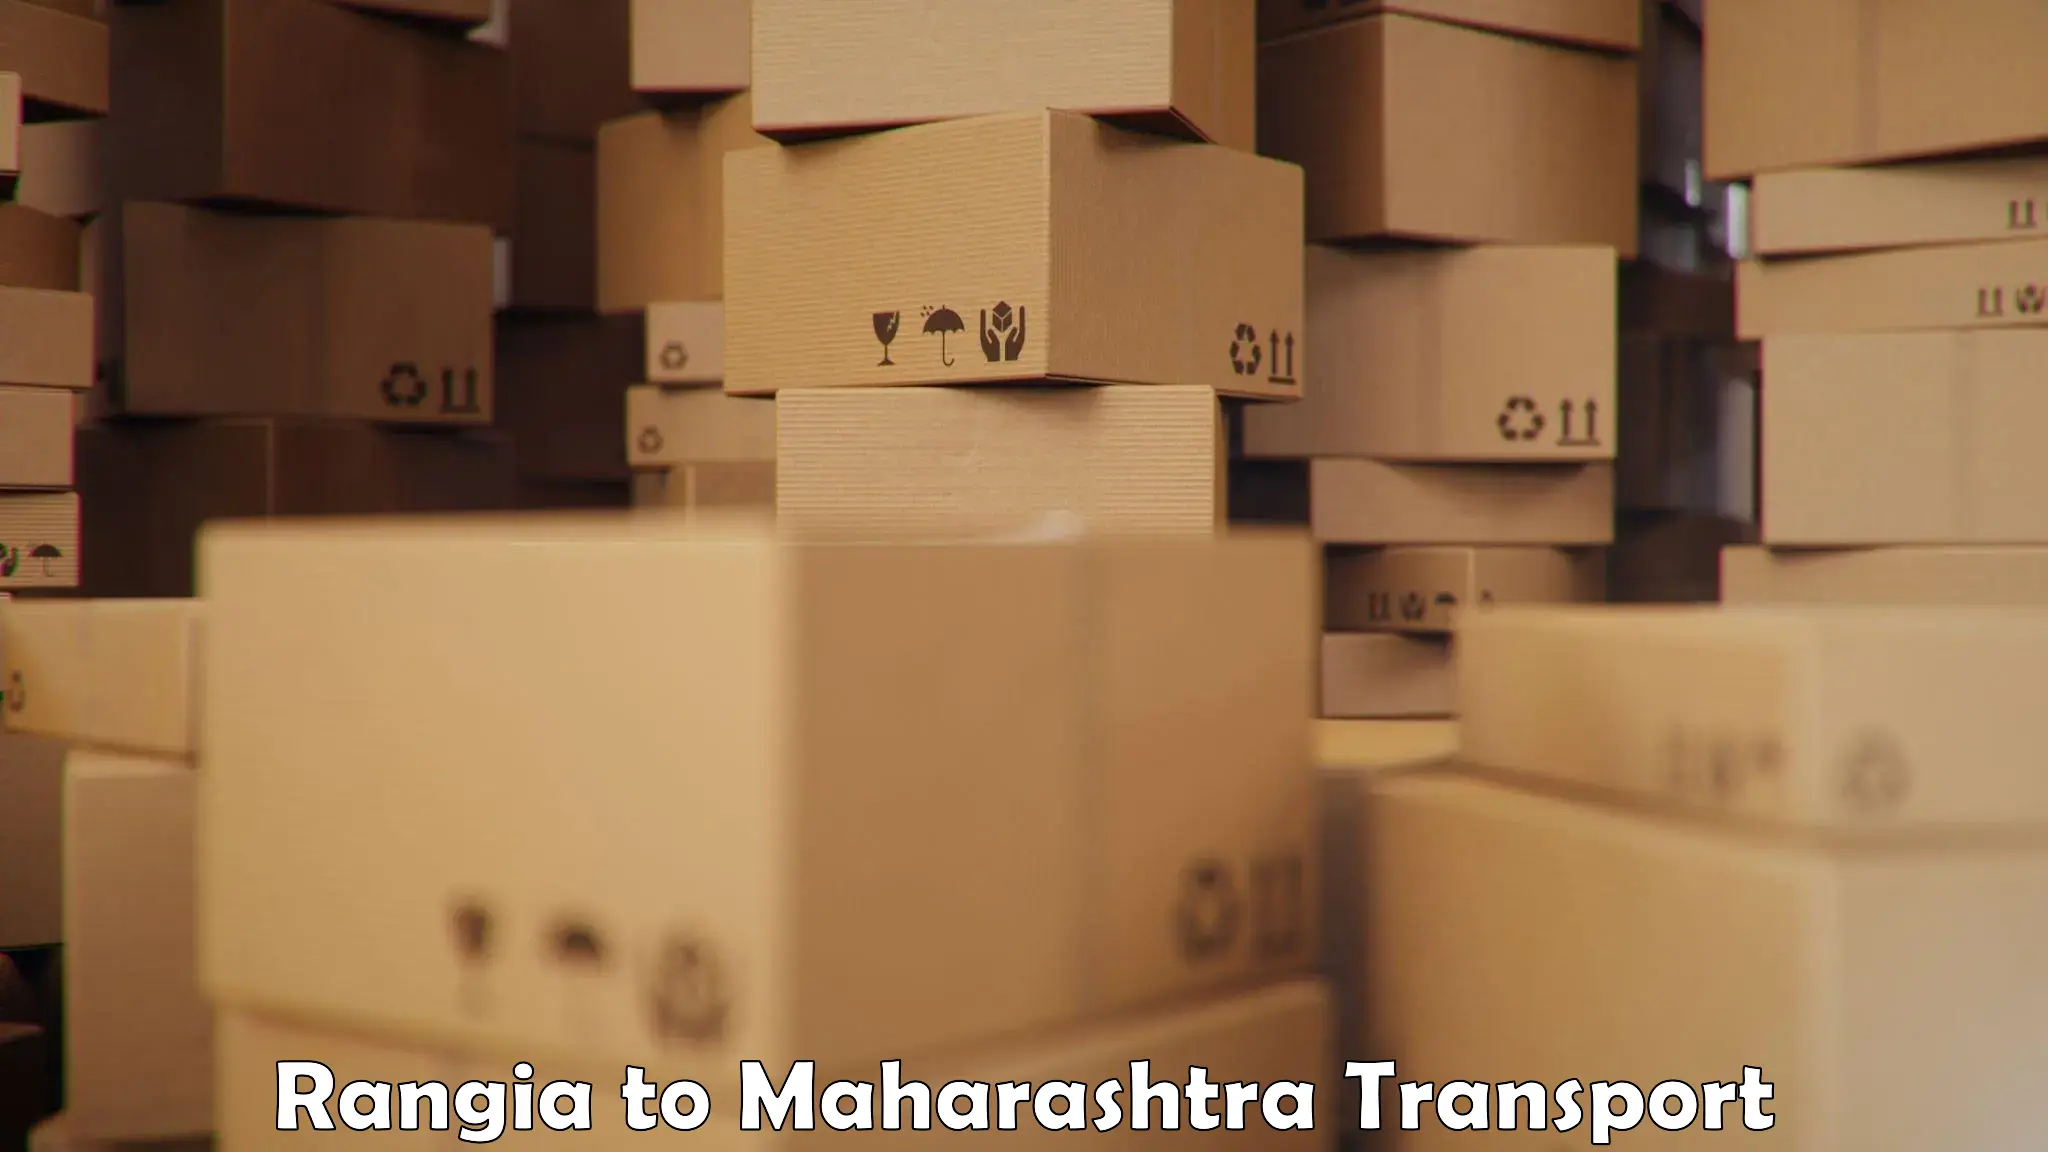 Truck transport companies in India Rangia to Talegaon Dabhade